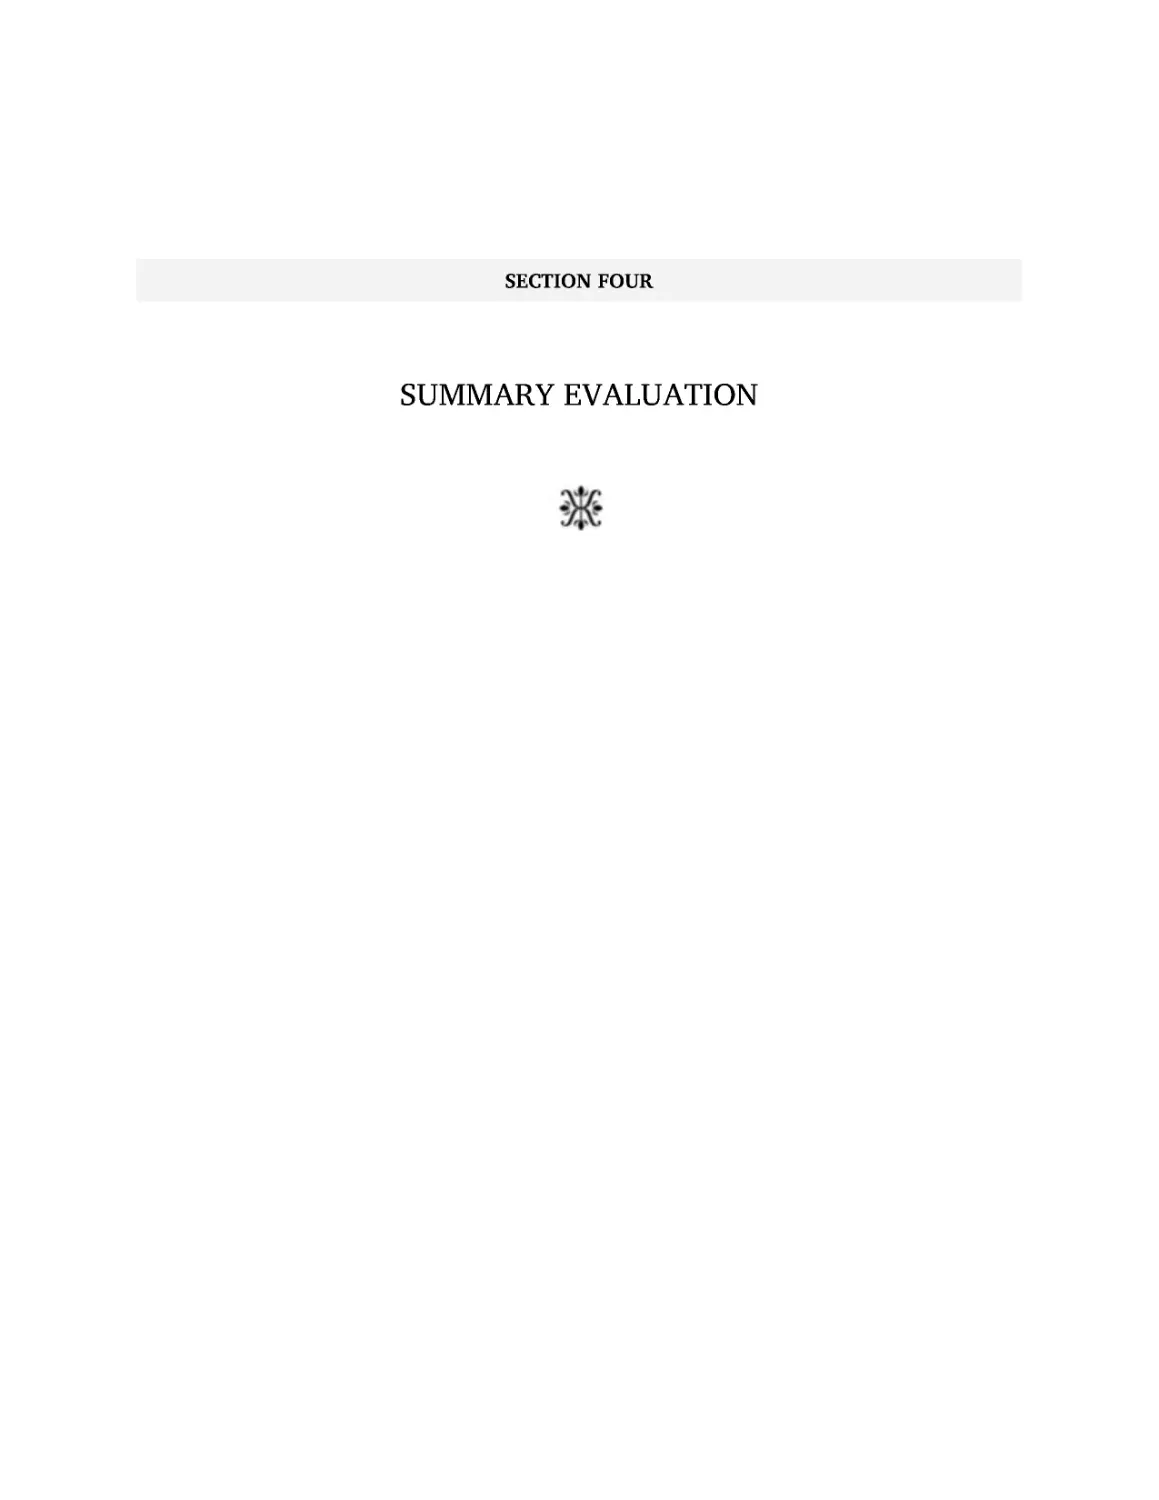 Section Four: Summary Evaluation